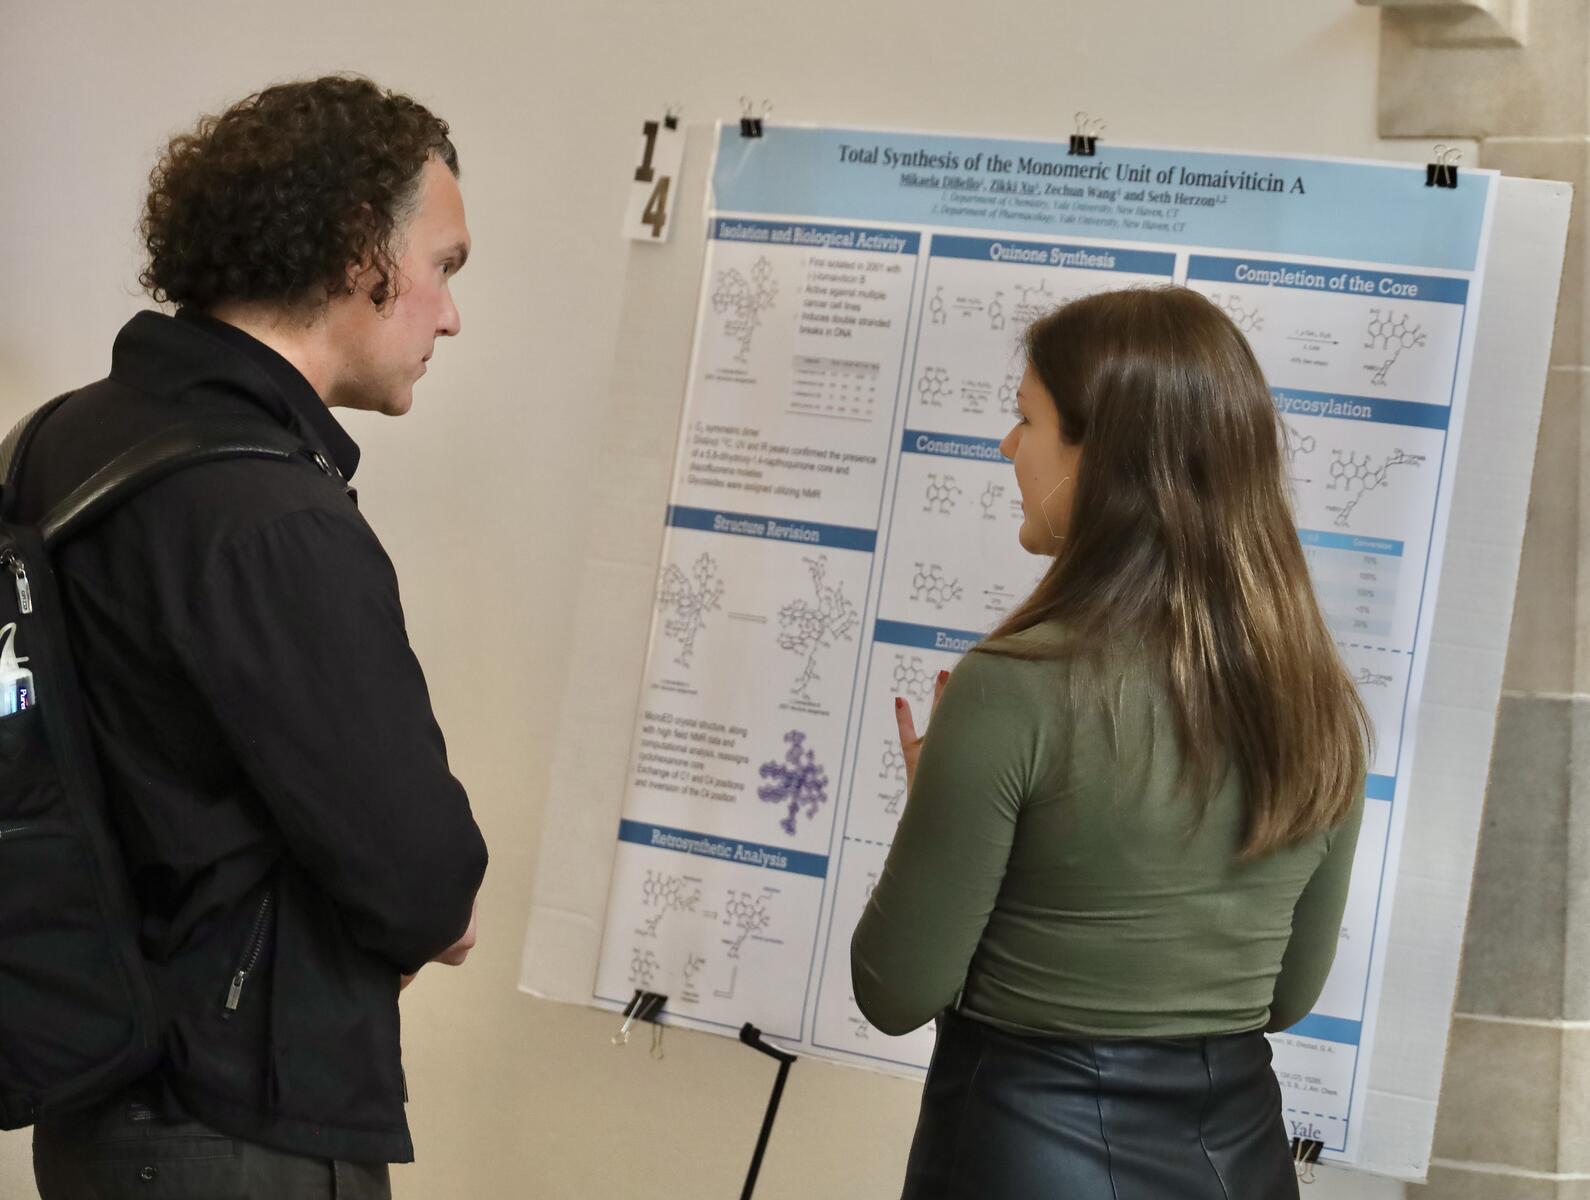 Man and woman chatting and looking at research poster